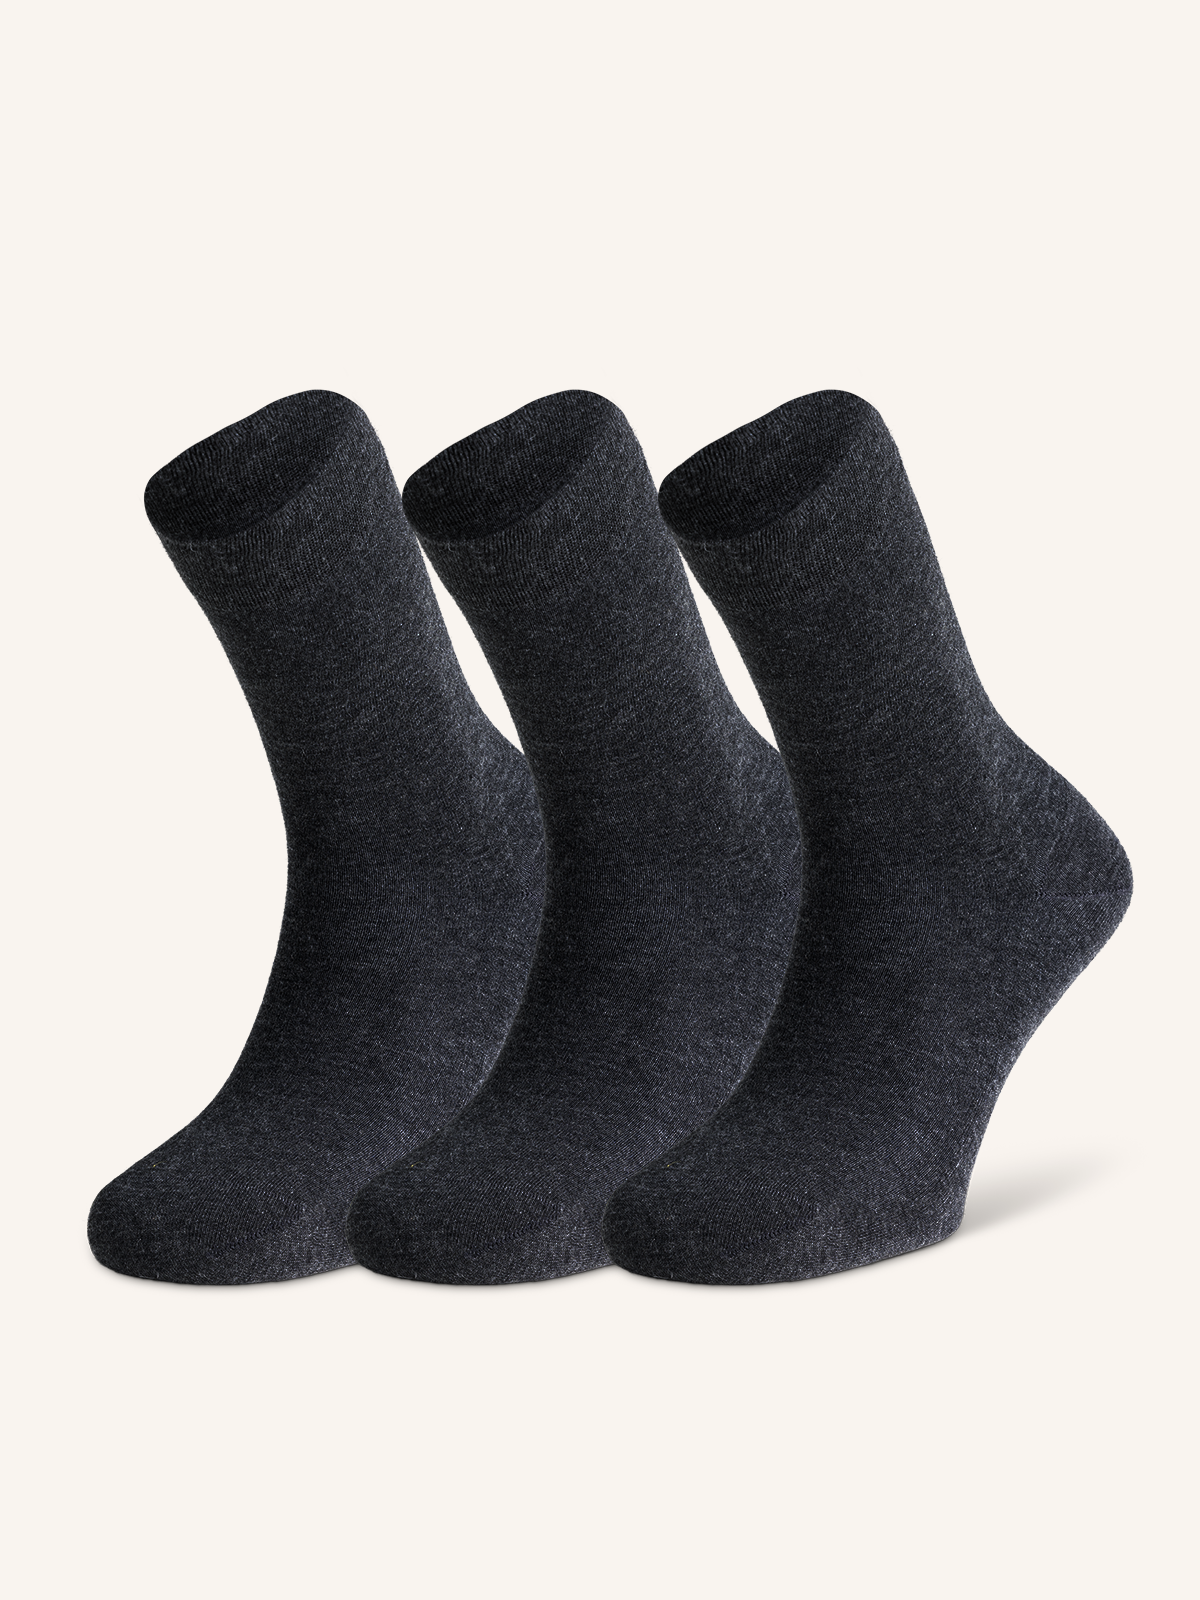 Short Wool Sock for Men | Plain Color | Pack of 3 Pairs | Cool Wool UC